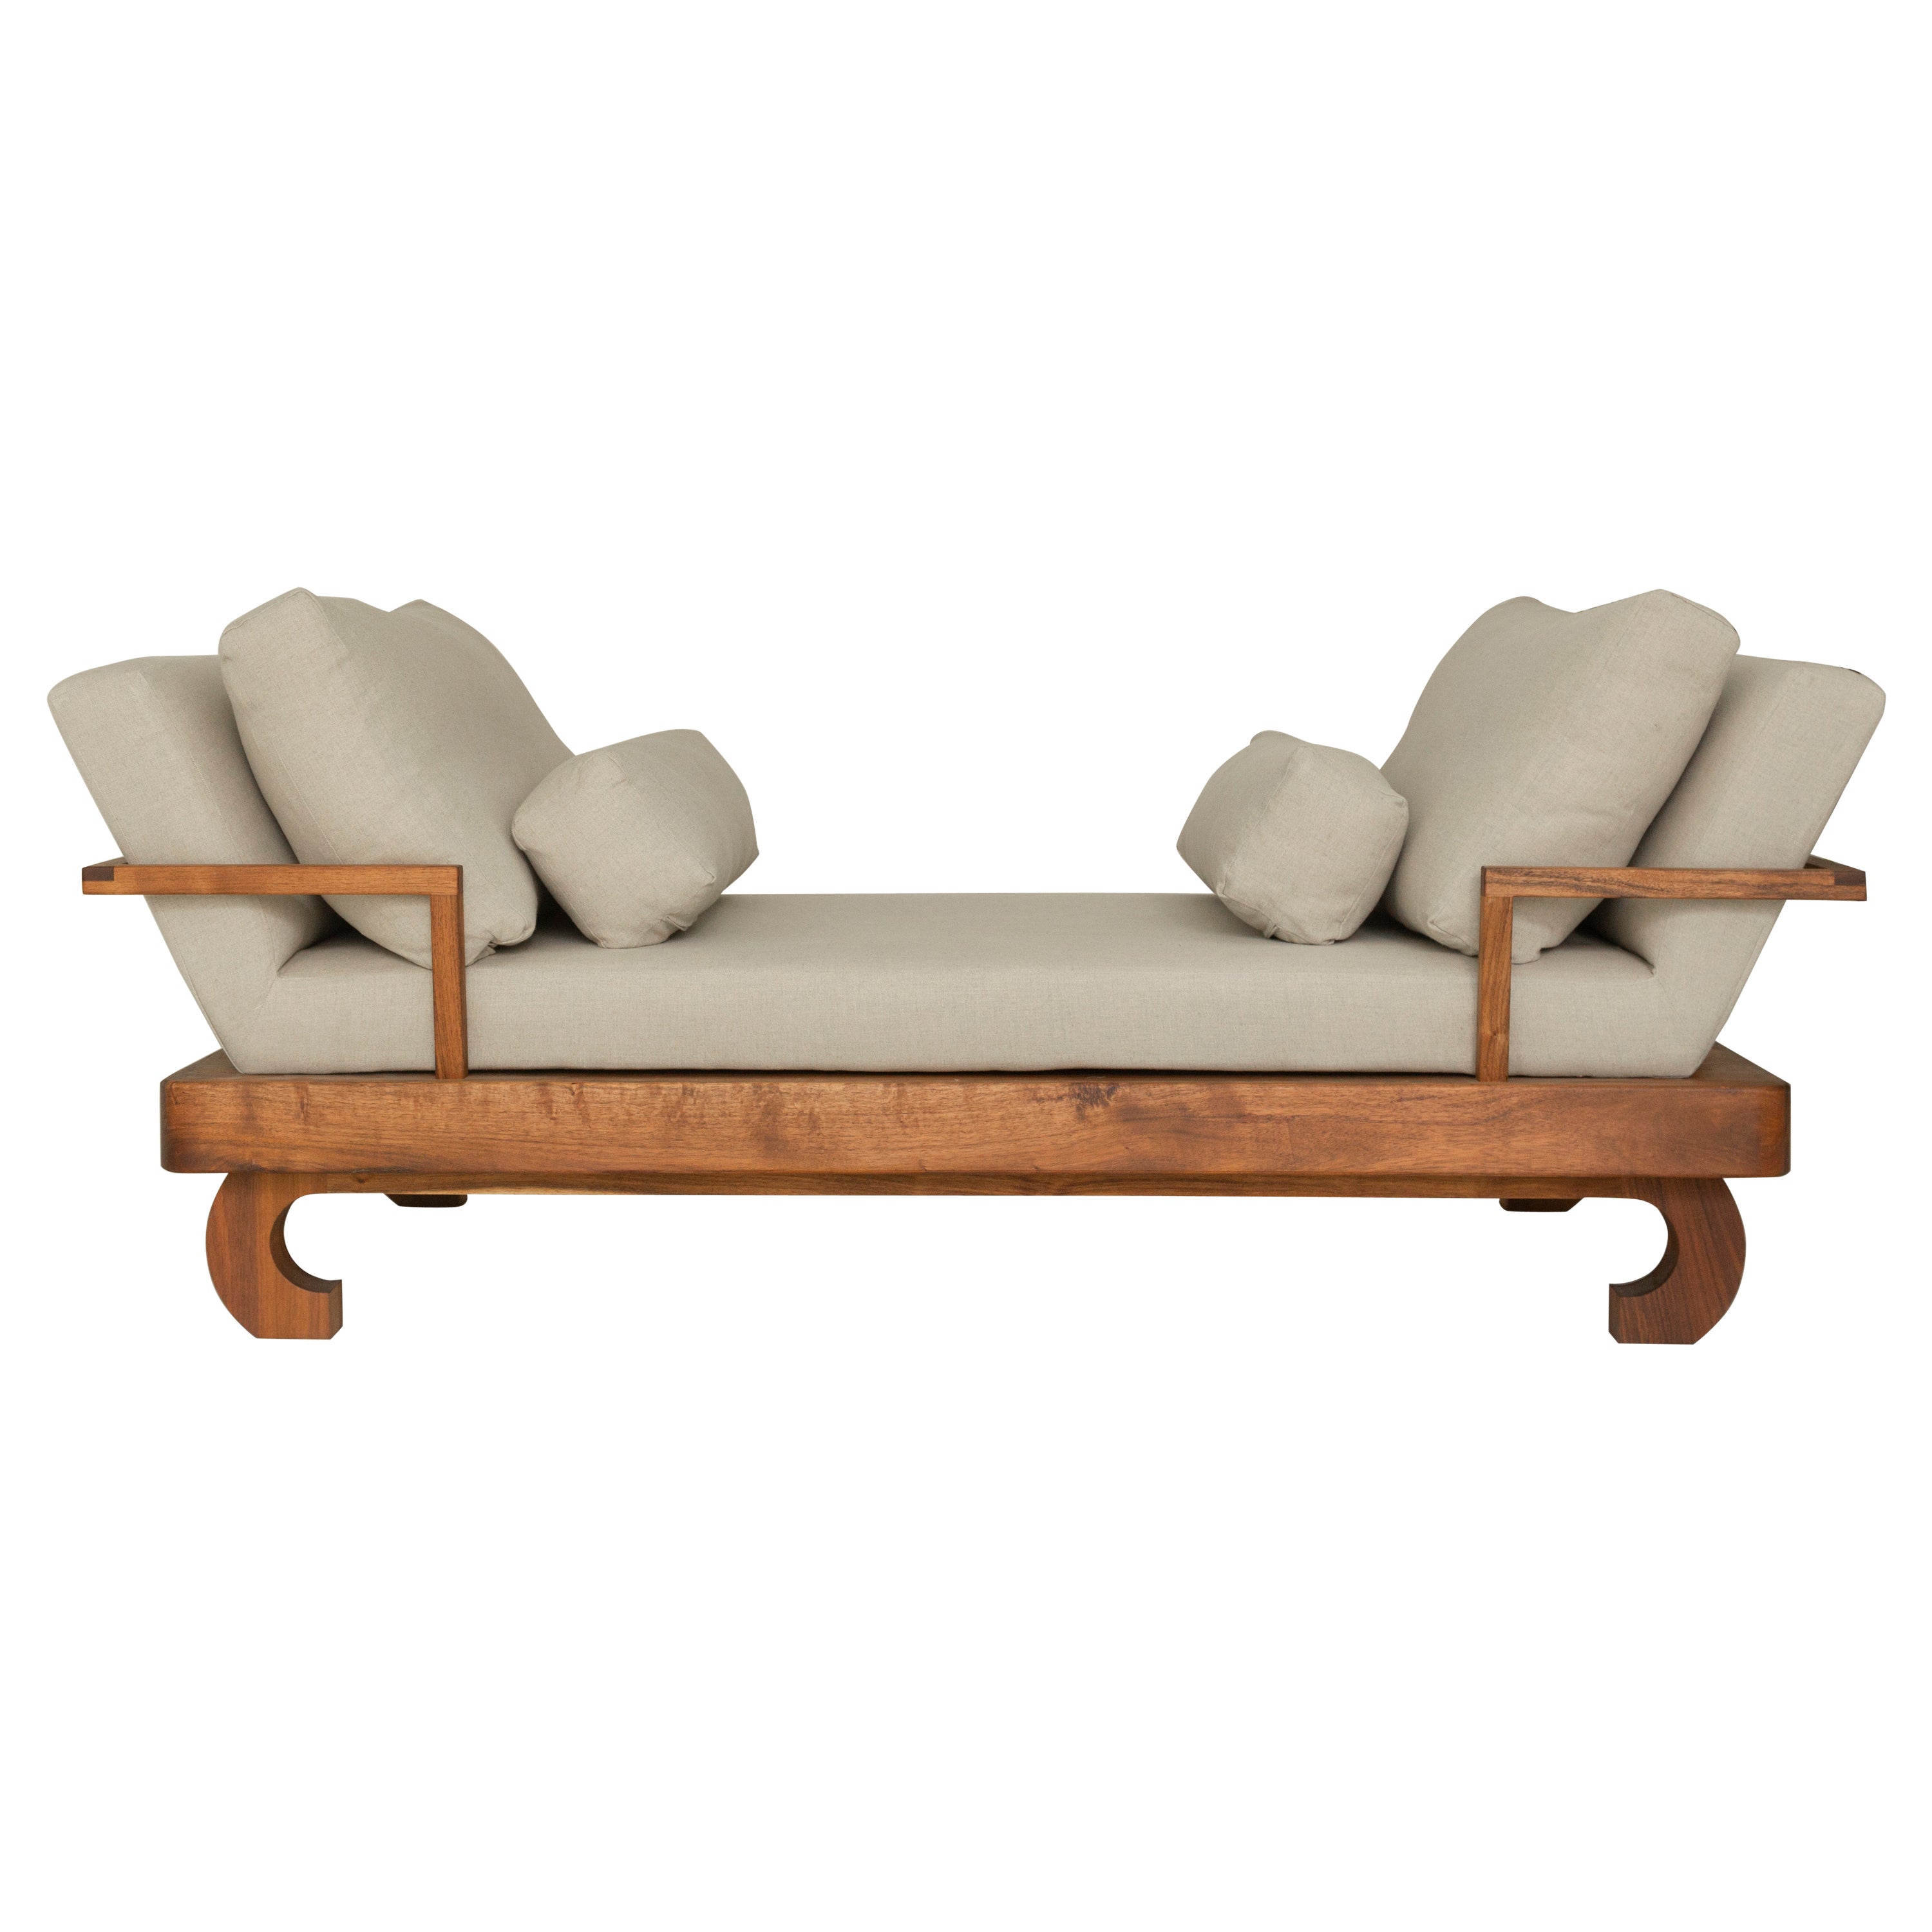 Marruecos Daybed in Tzalam Wood and Fabric in Linen Designed by Tana Karei